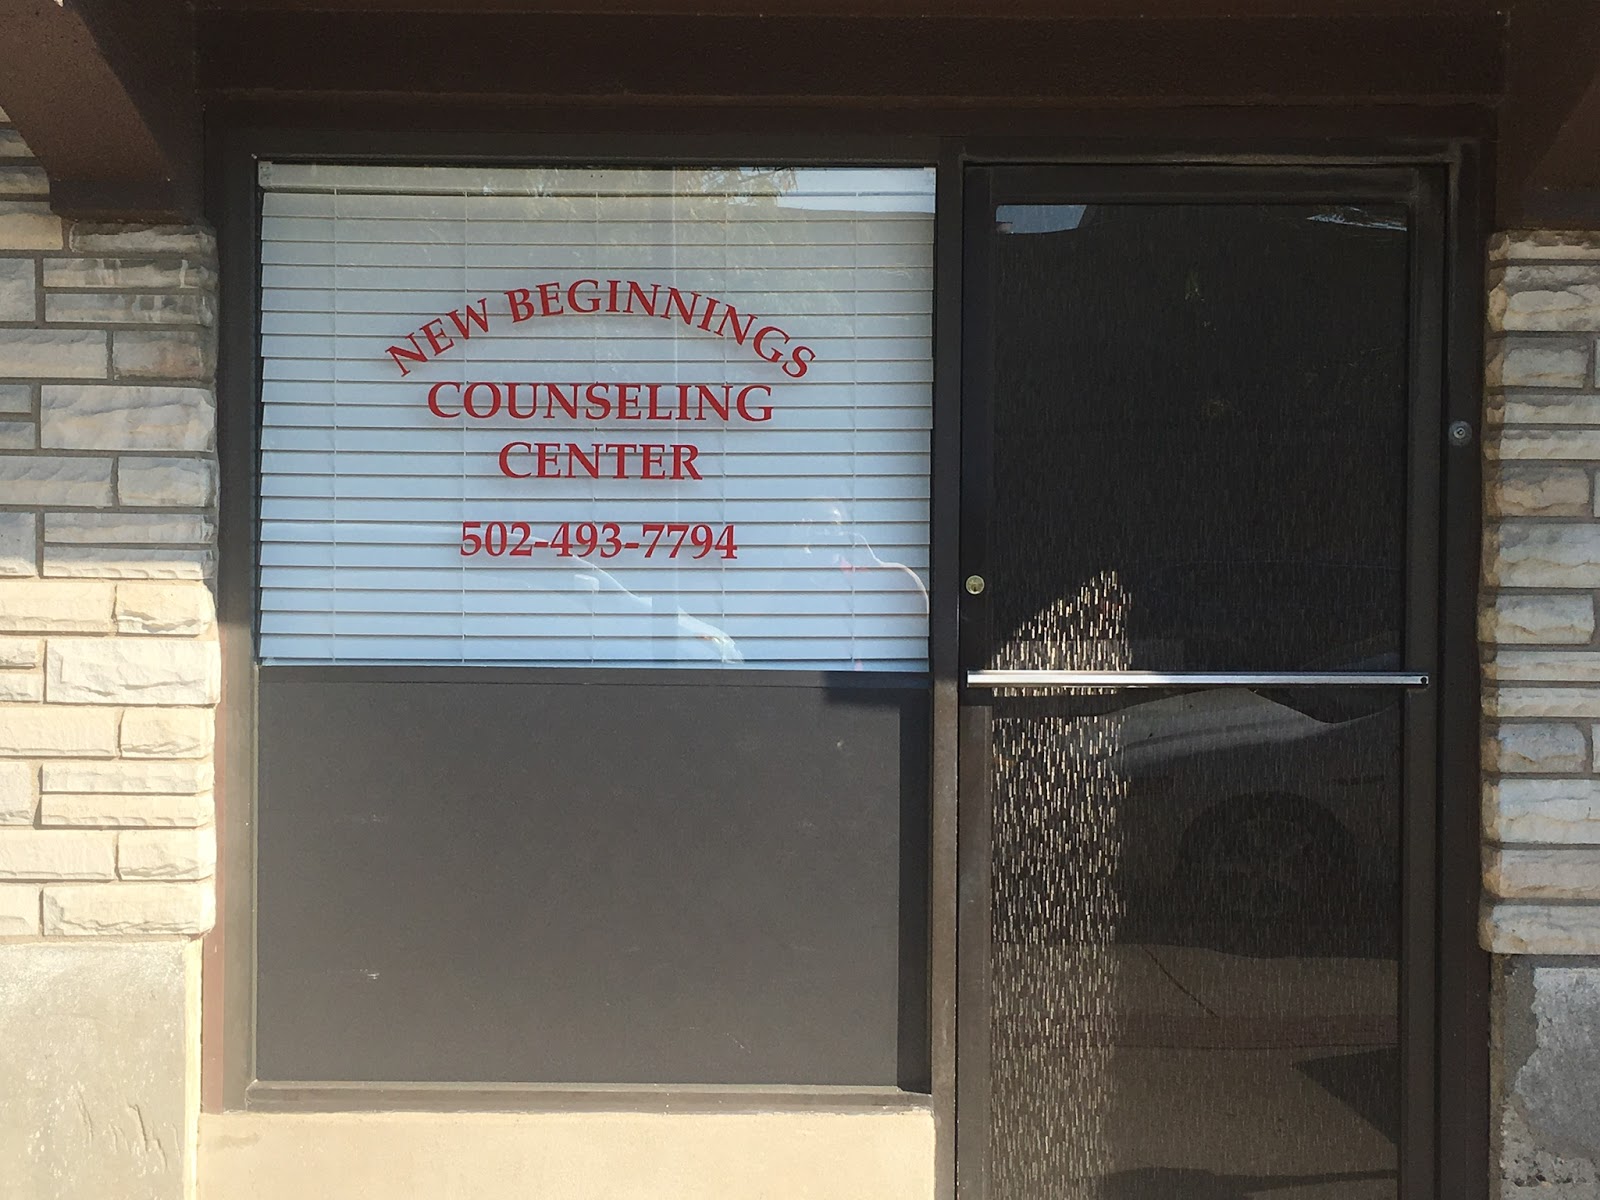 New Beginnings Education and Counseling Center